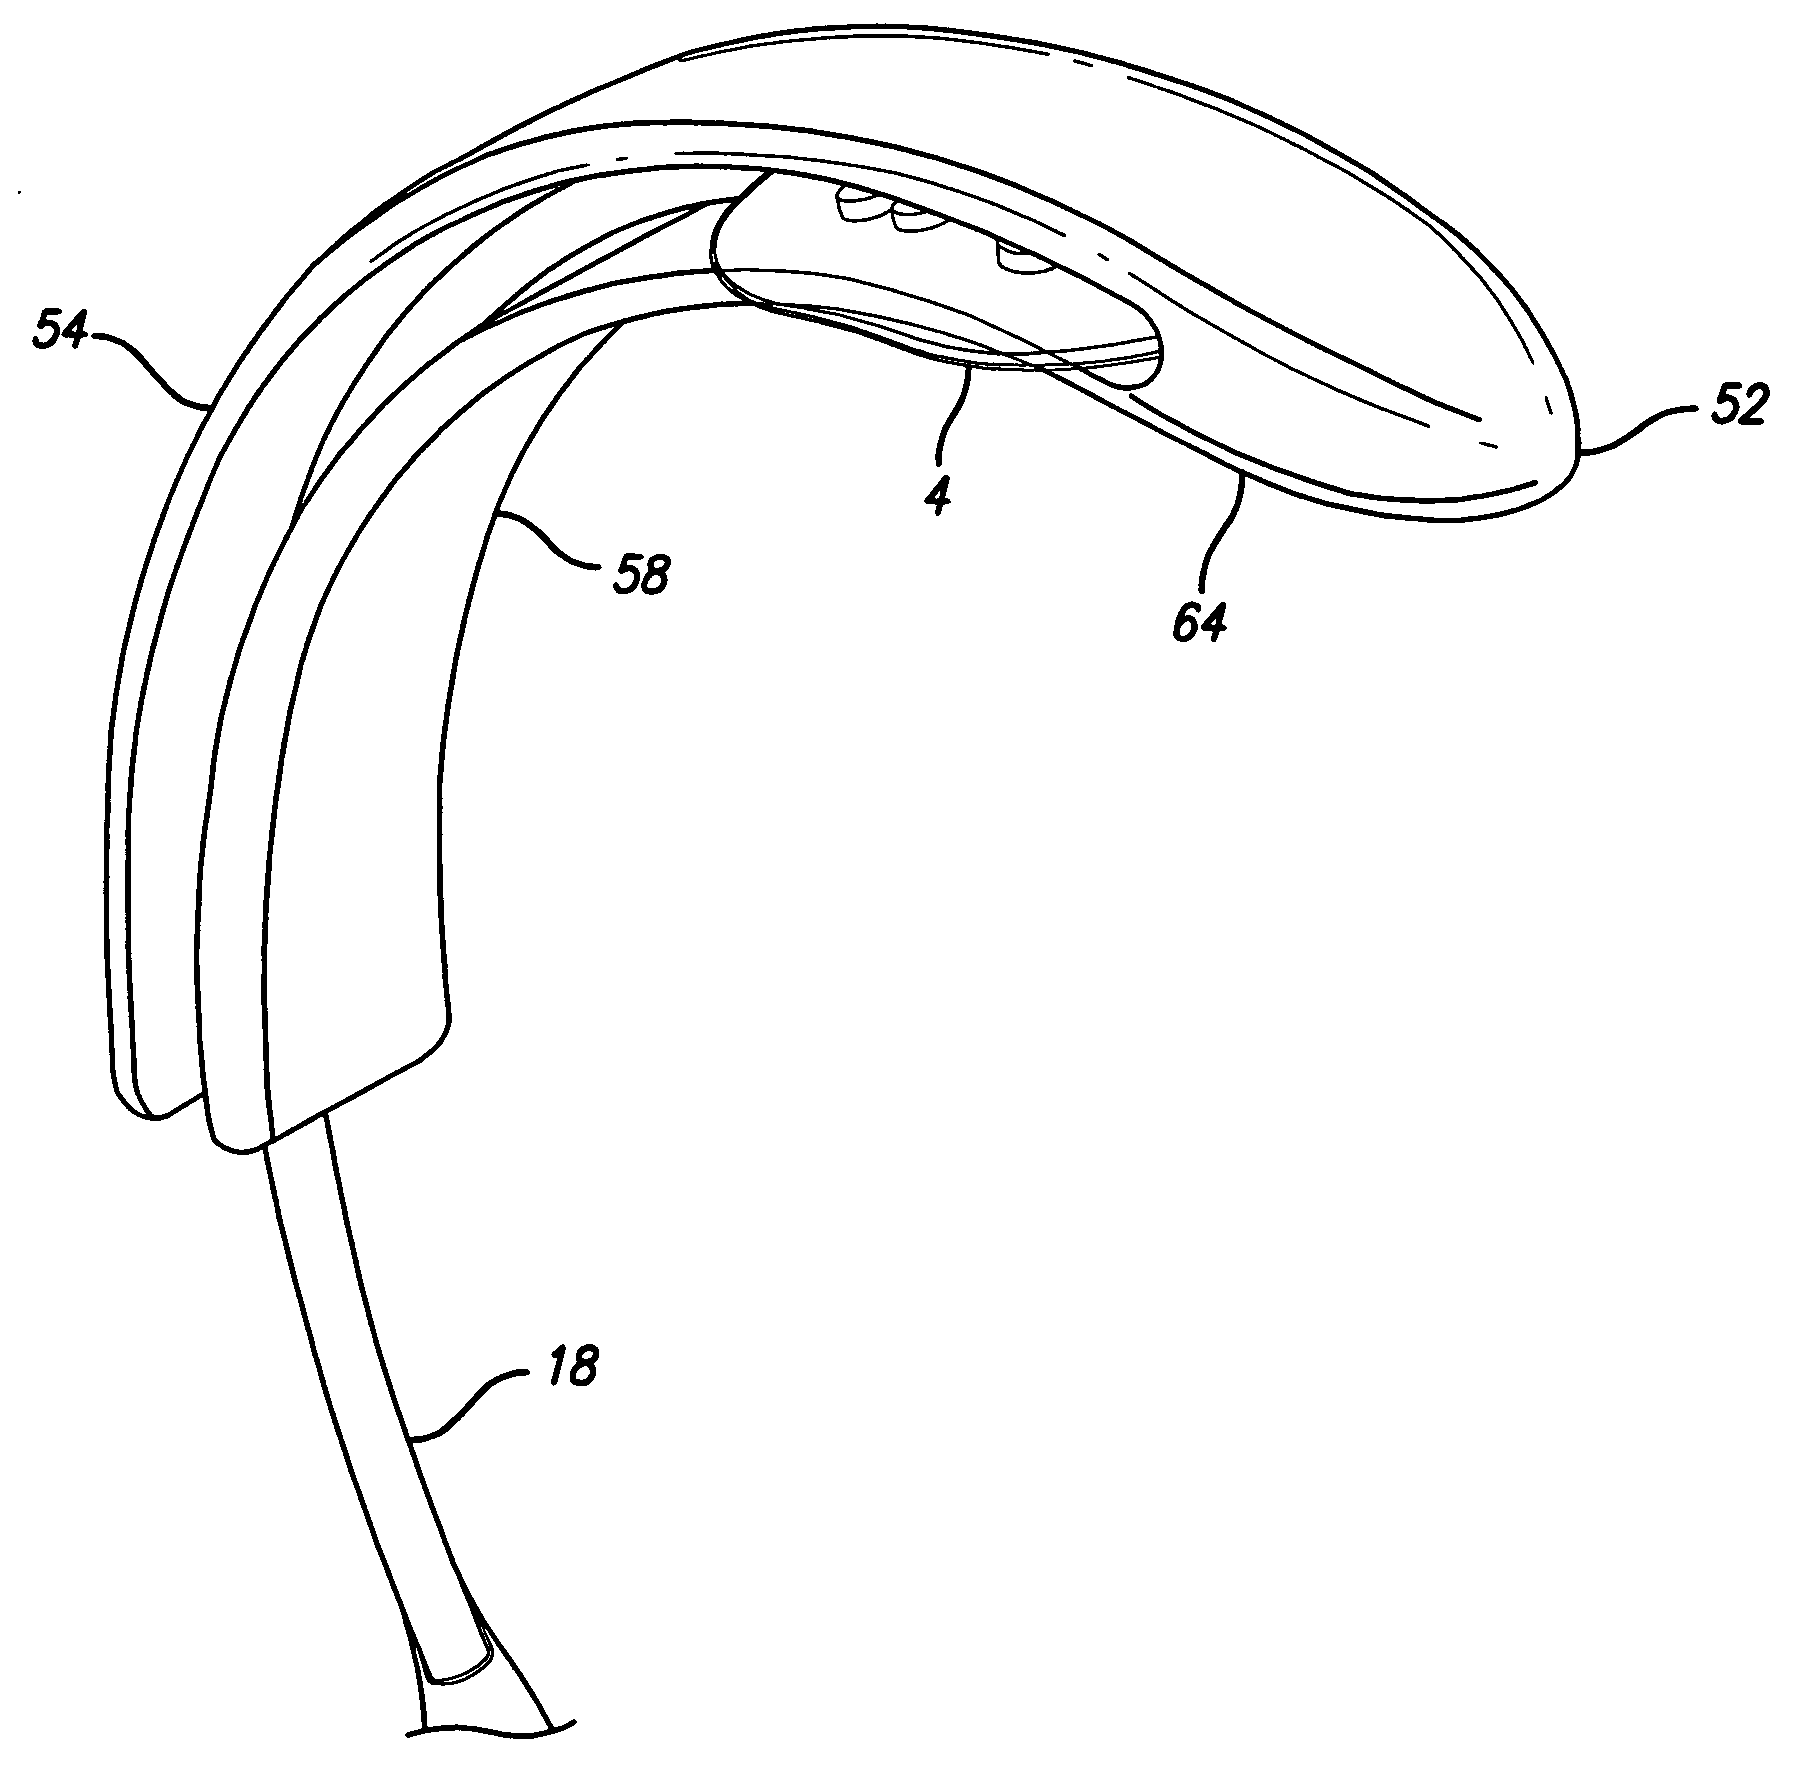 Surgical tool for electrode implantation